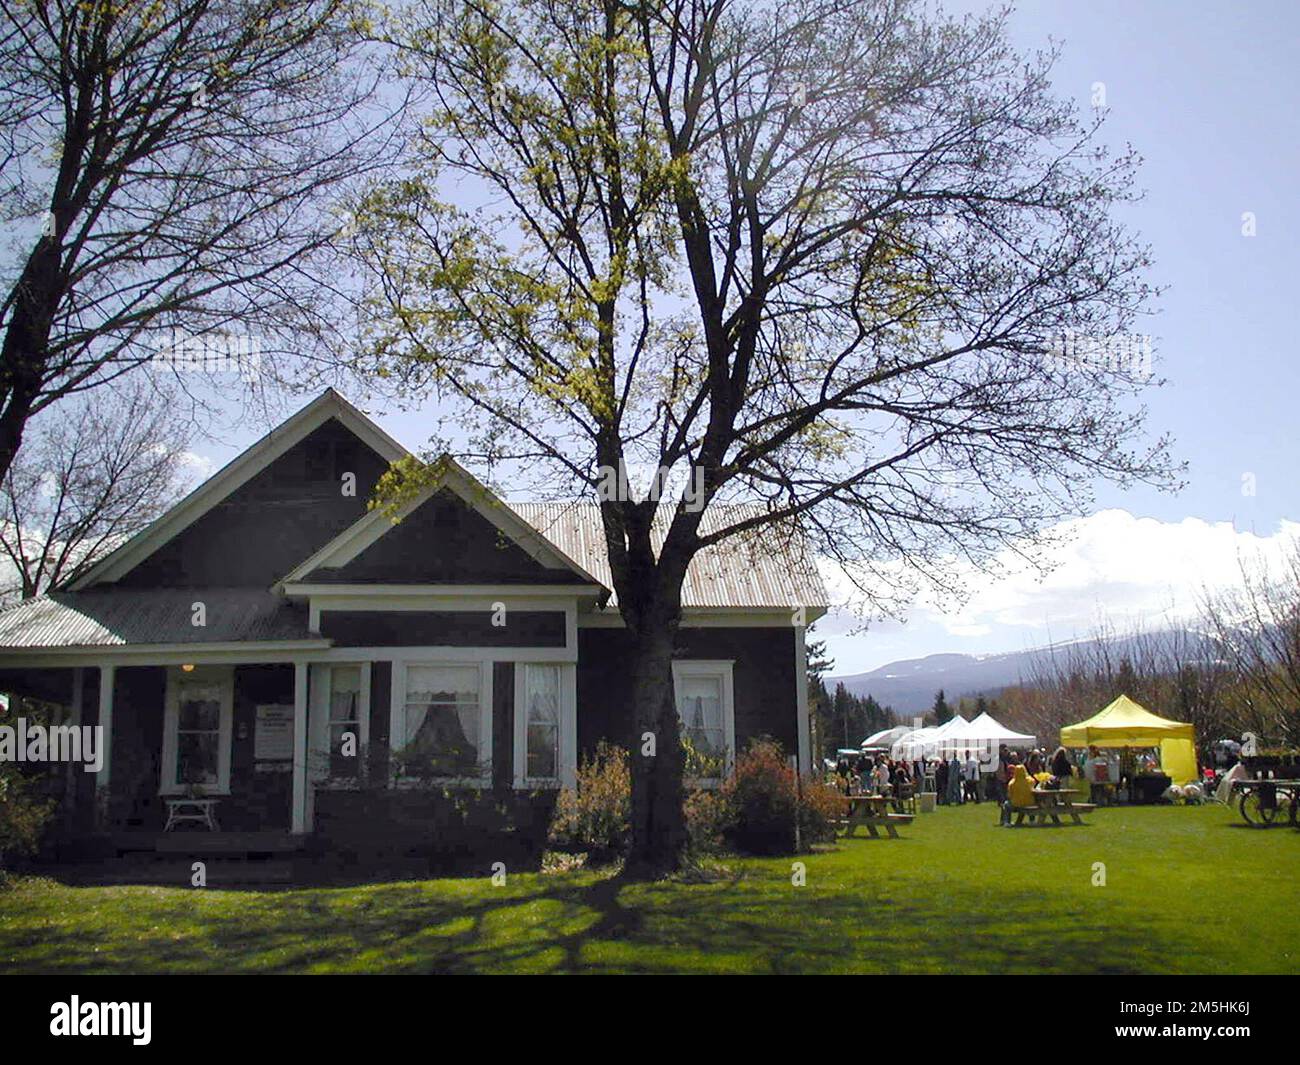 Mt. Hood Scenic Byway - Hutson Museum. Built in 1993 to match the style of the neighboring Ries-Thompson House, the oldest remaining residence in Parkdale, the Museum is located on the 2-acre complex designated as a National Historic Site. Location: Parkdale, Oregon (45.520° N 121.597° W) Stock Photo